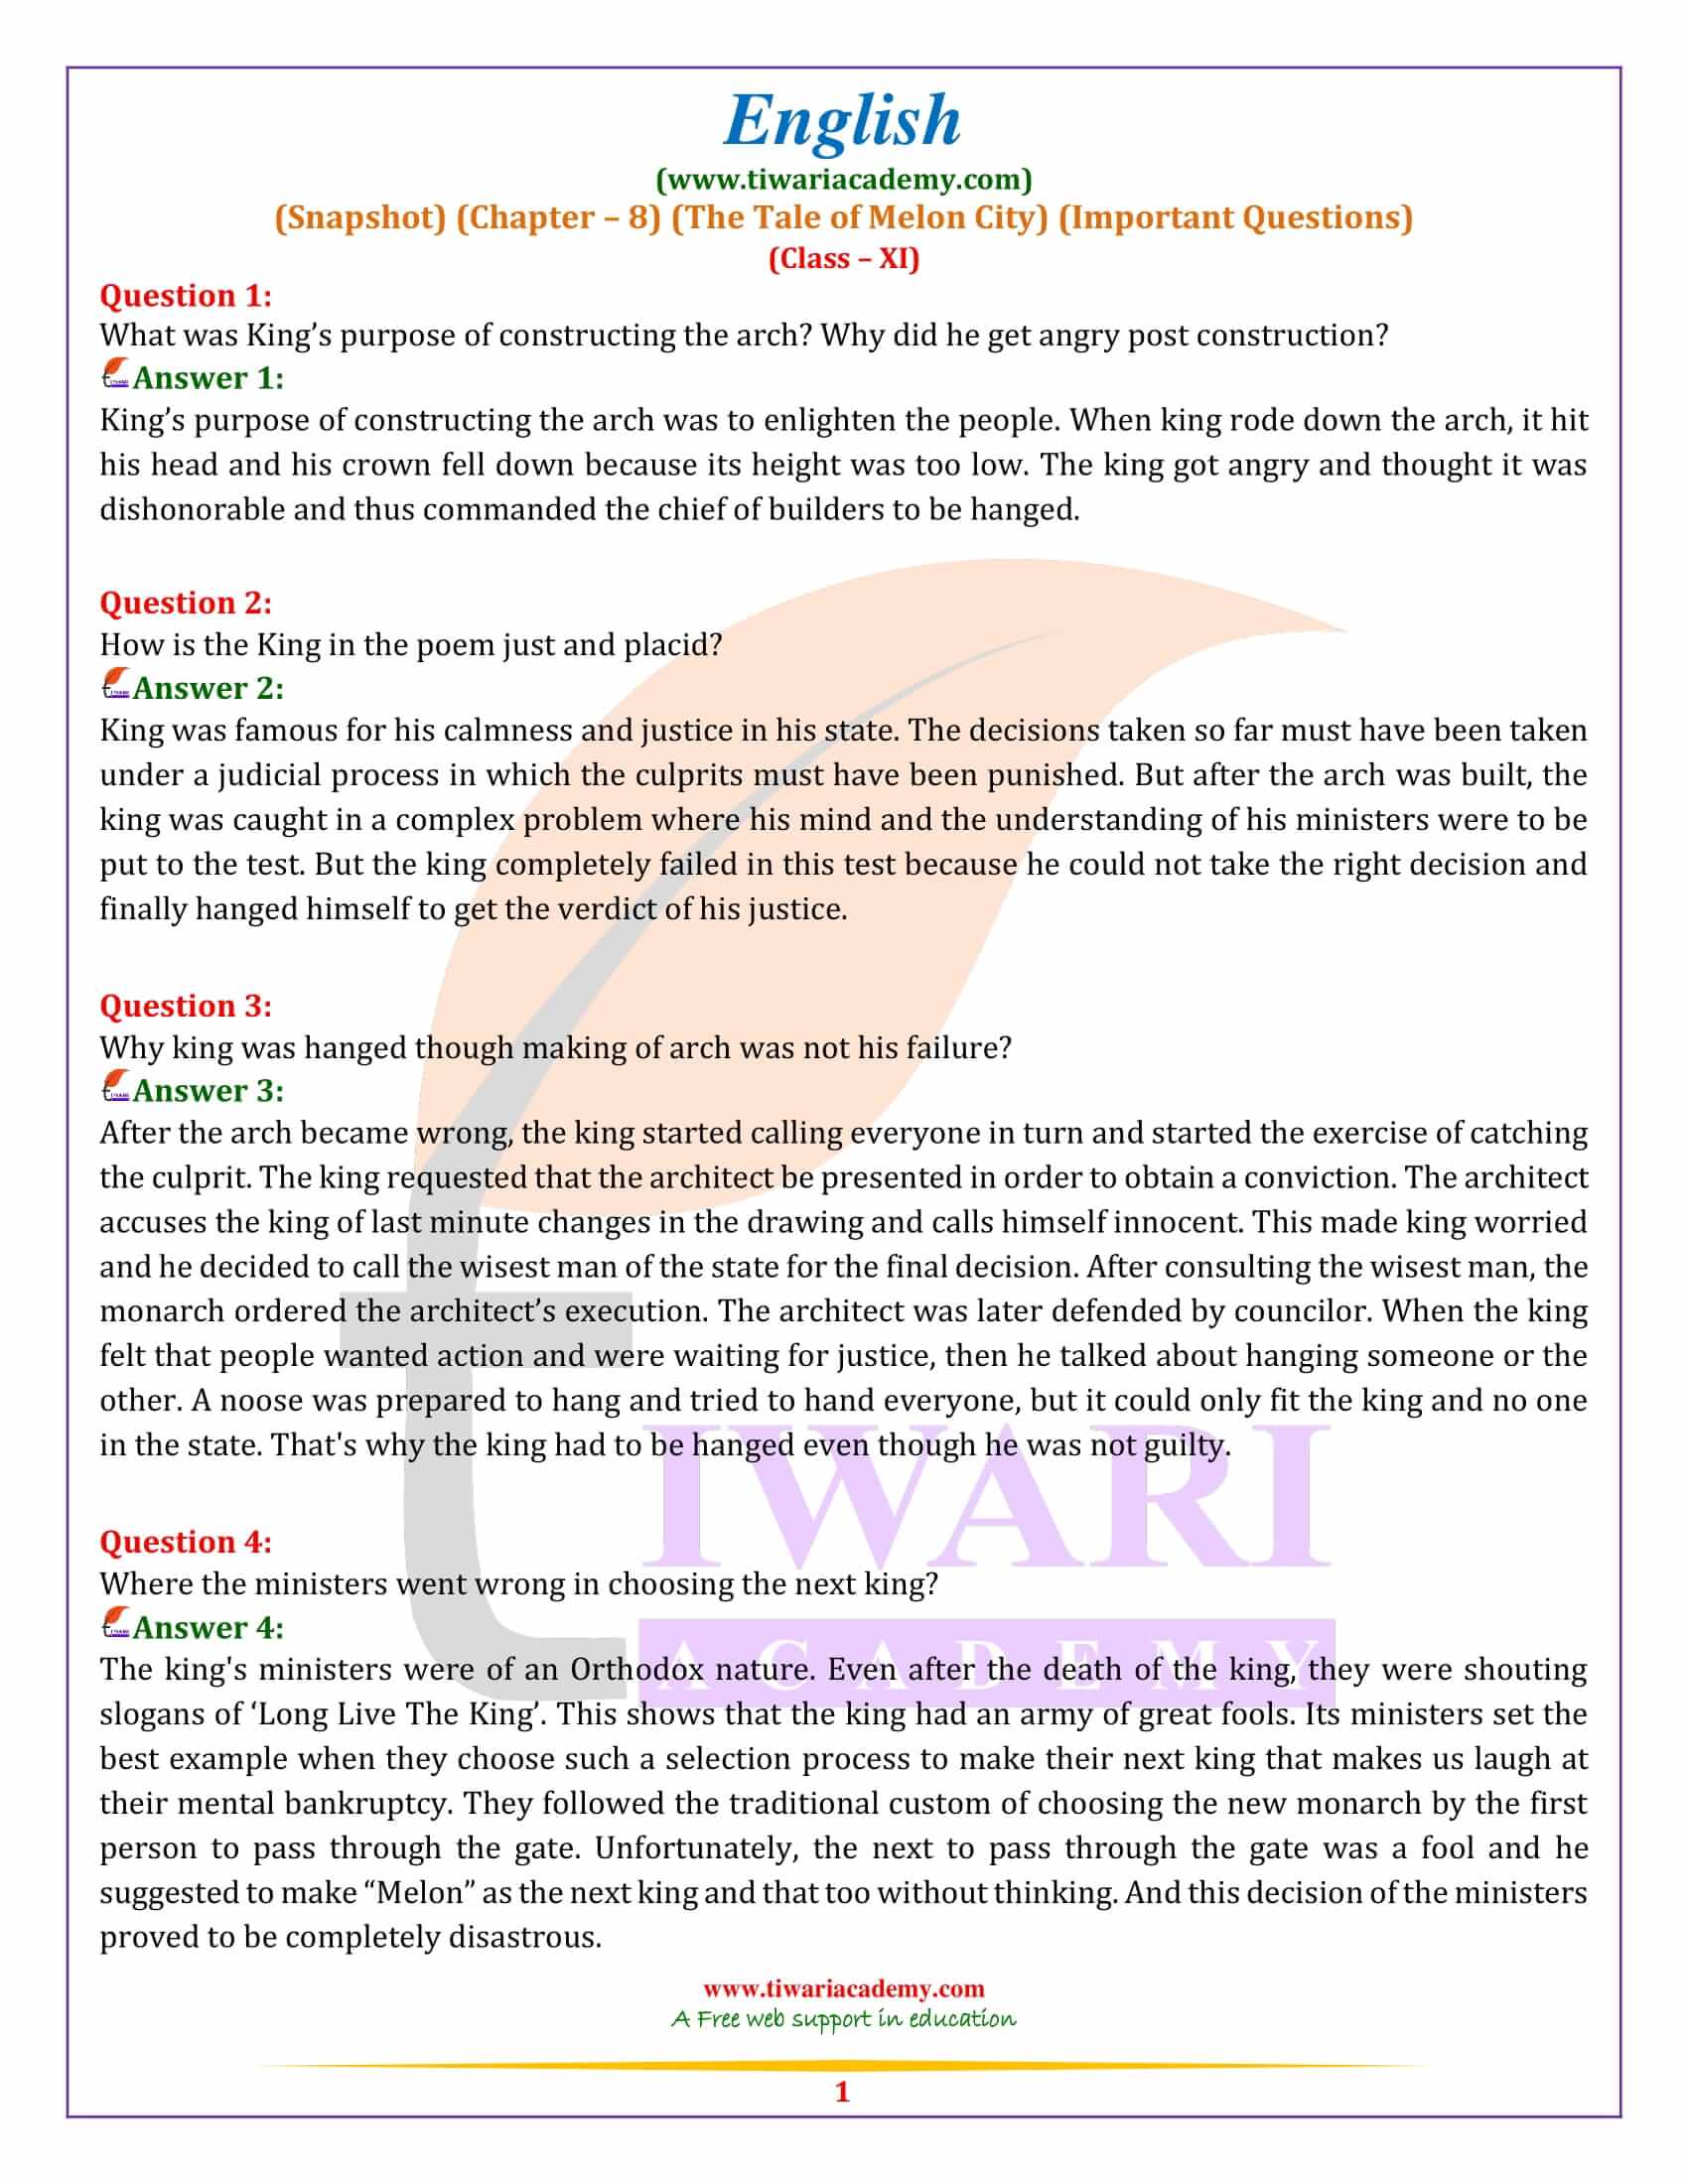 Class 11 English Snapshots Chapter 8 Extra Questions